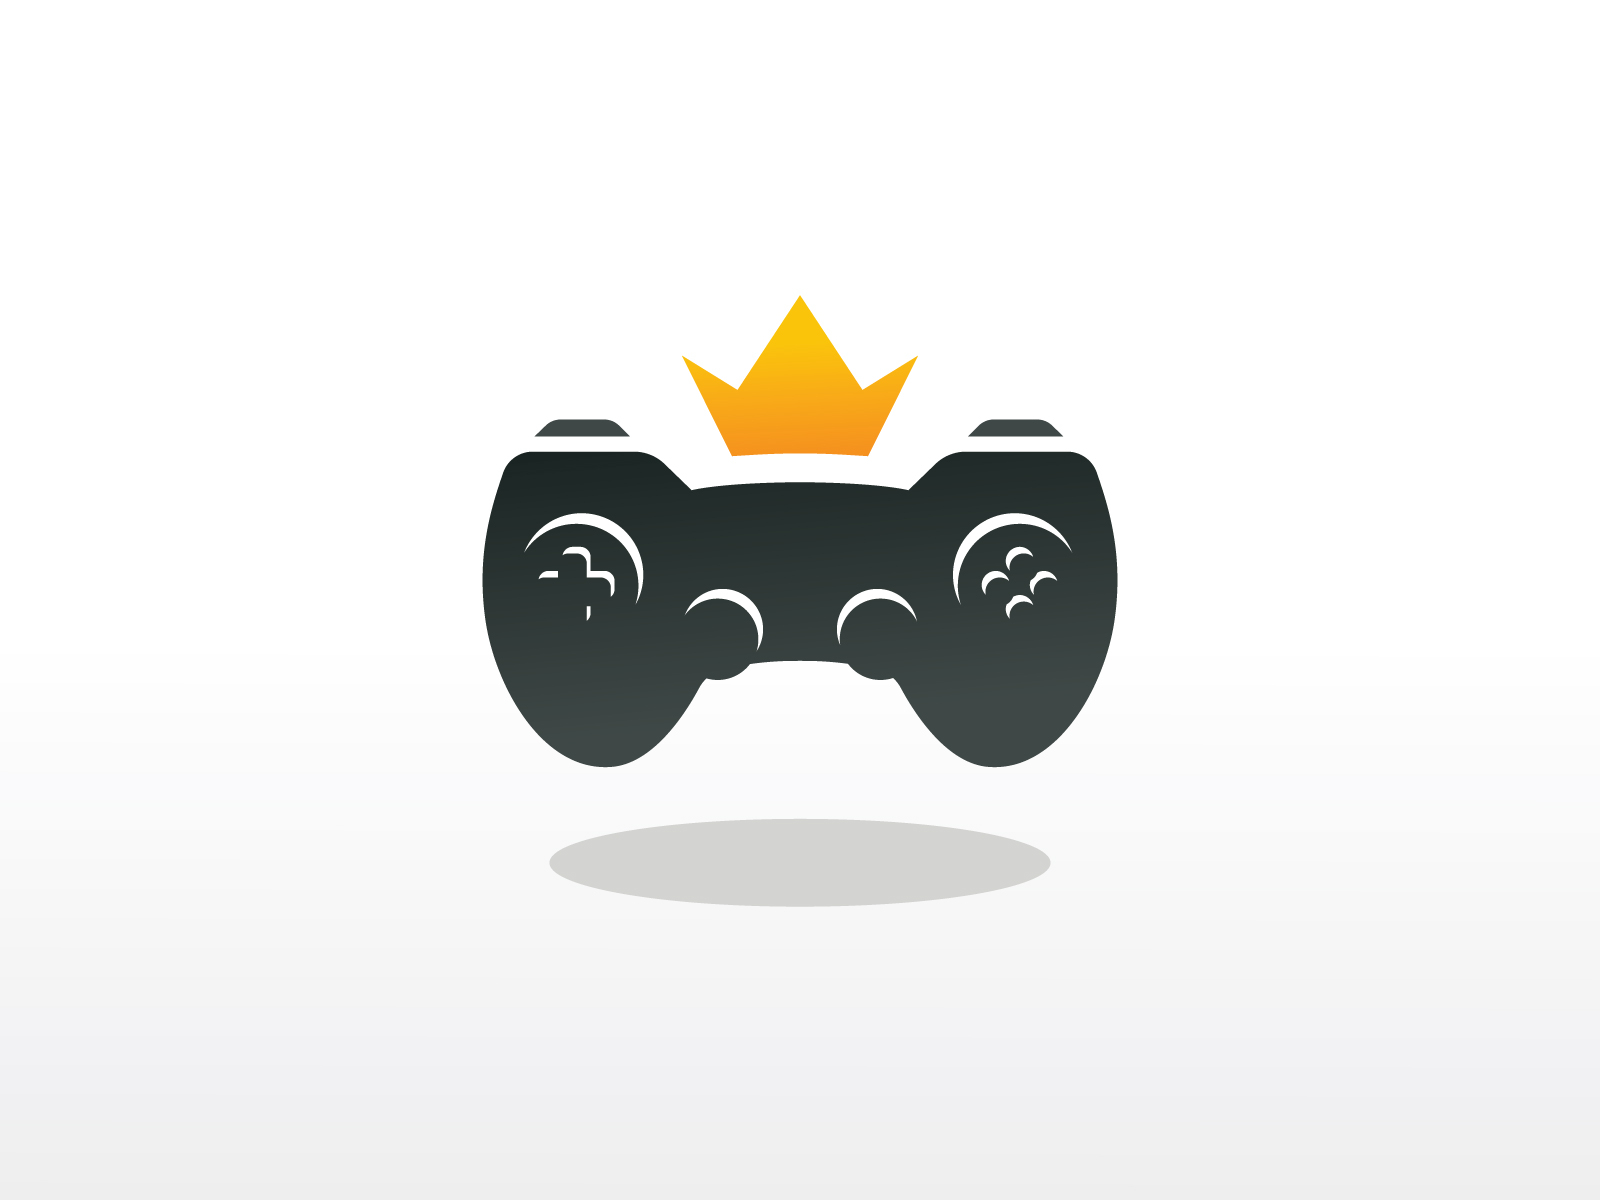 Give Your Game a Professional Logo With Game Icons